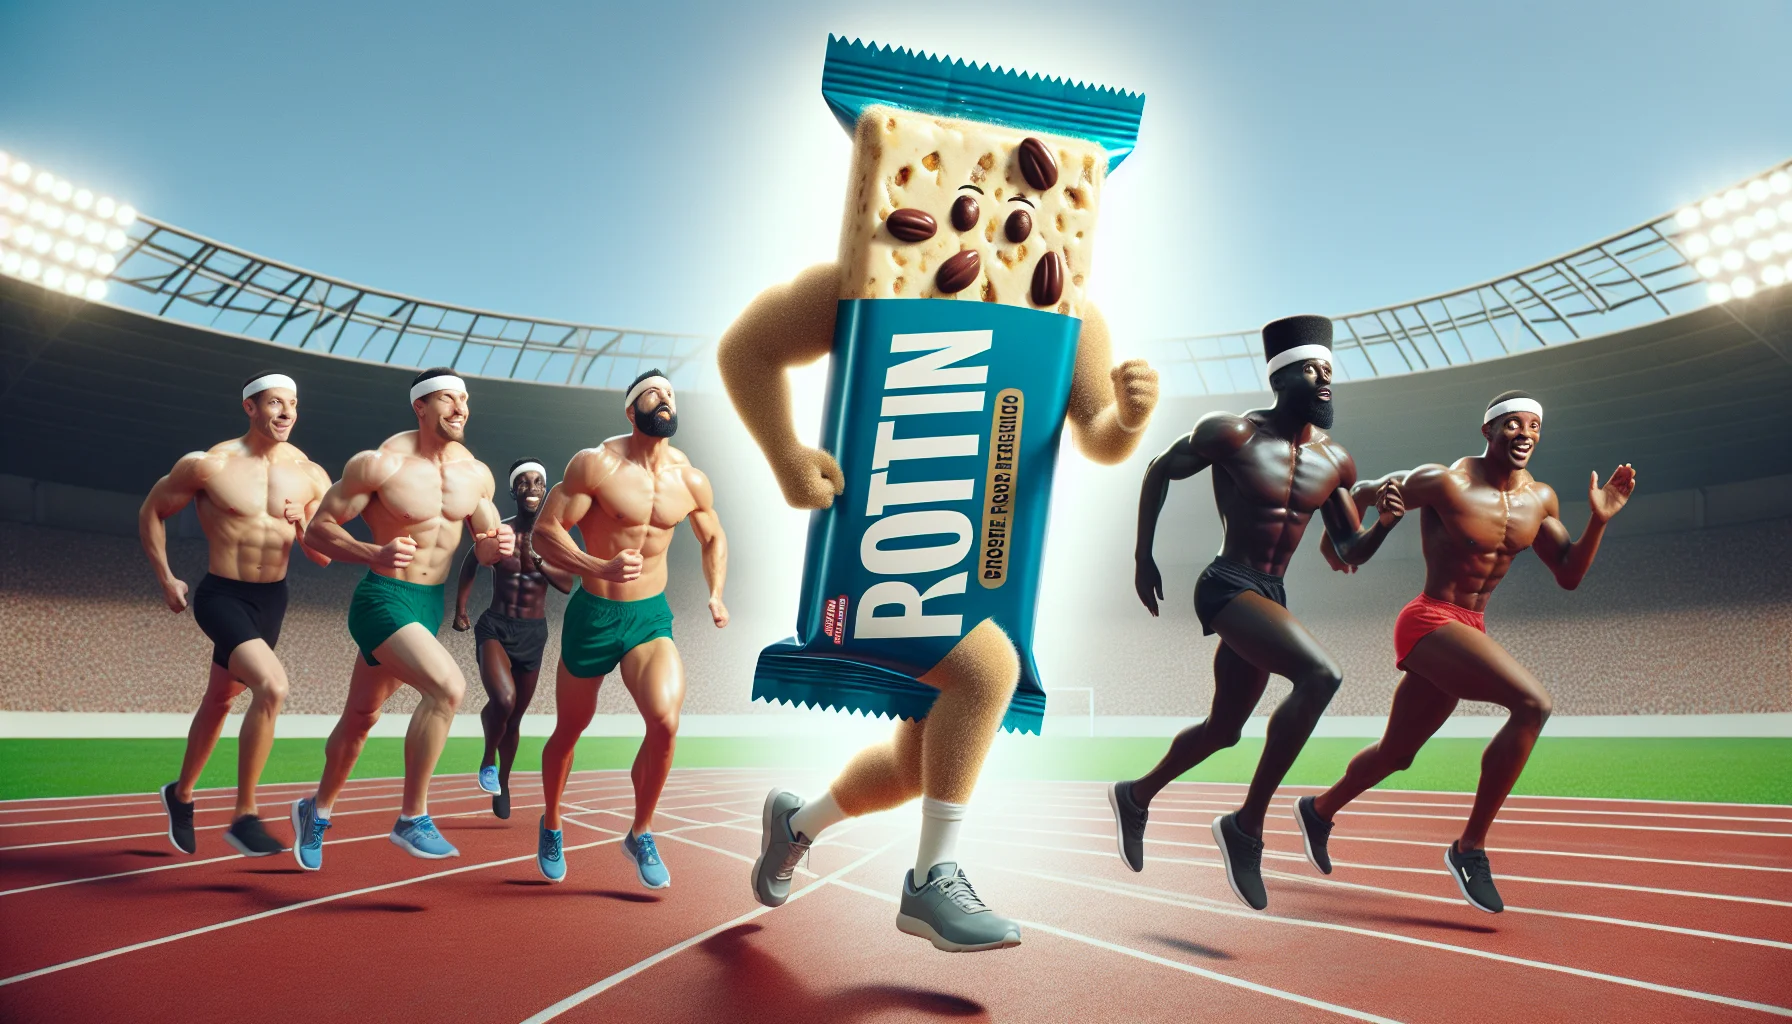 Imagine a humorously humorous scene occurring at a sports field. At the center, a giant, ultra-realistic protein bar wearing running shoes and a sweatband is participating in a sprint race against human athletes of various descents such as Black, Caucasian, South Asian, Hispanic and Middle-Eastern. In this whimsical scene, the protein bar, despite its lack of limbs, is leading the race, much to the surprise and amusement of the audience. The protein bar radiates an enticing glow, suggesting its appeal as a go-to supplement for sports enthusiasts.